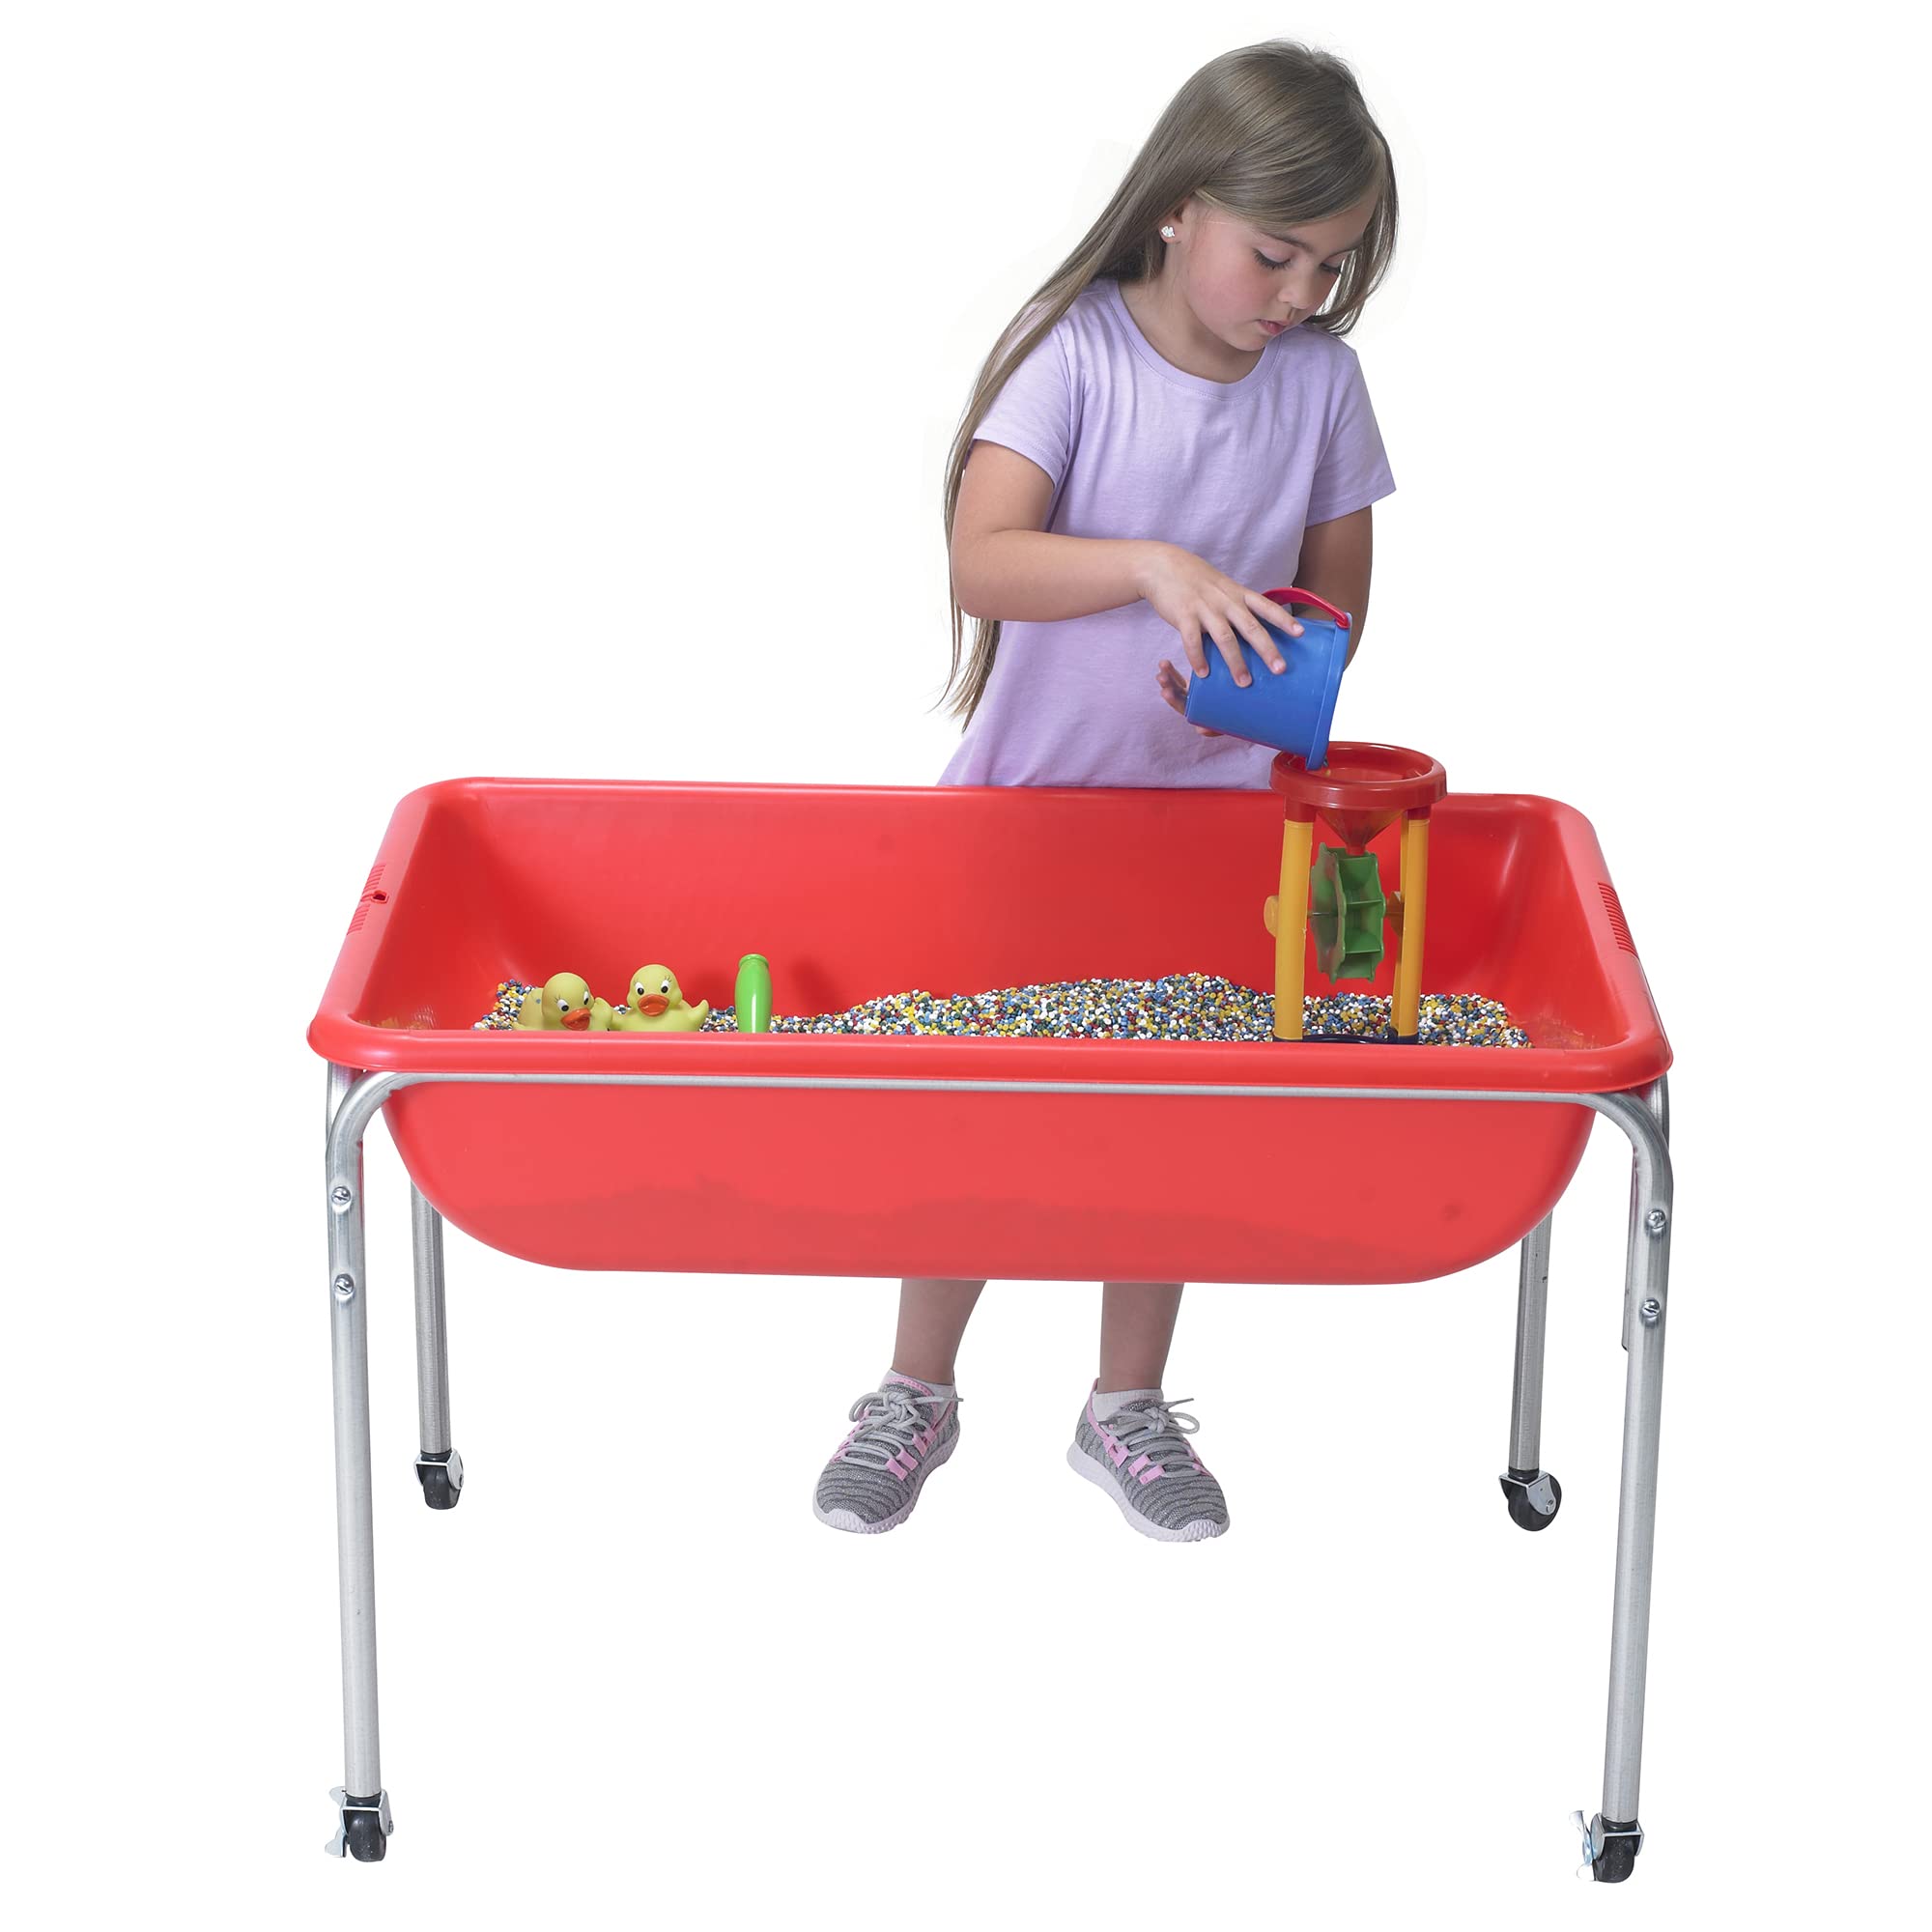 Children's Factory, 1135-24, Large Sensory Table & Lid, Kids Playroom & Classroom Autism Activity, Daycare or Preschool Learning Activities, 24